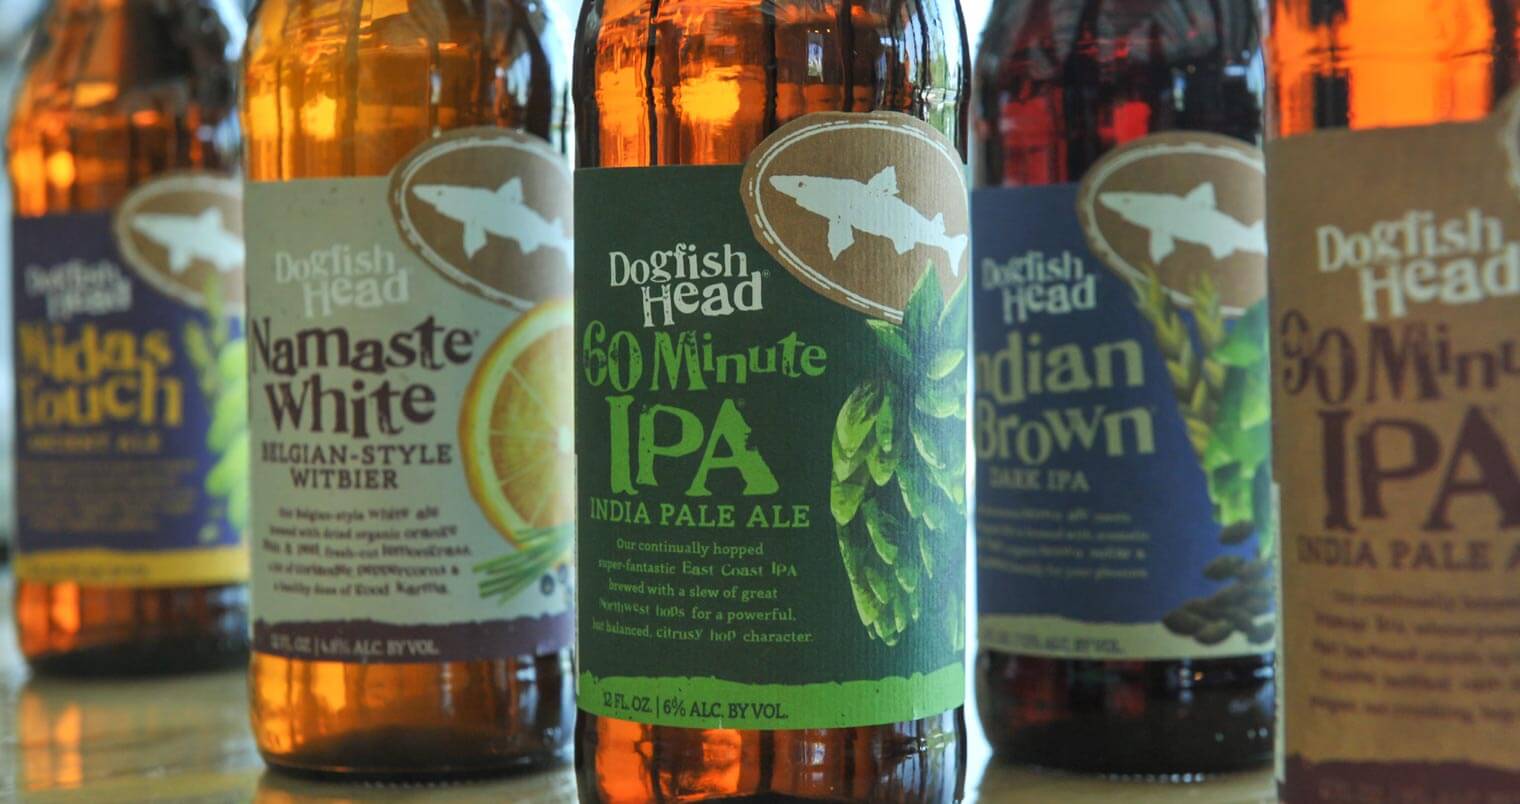 Dogfish Head Brewery Announces New Packaging Design, featured image